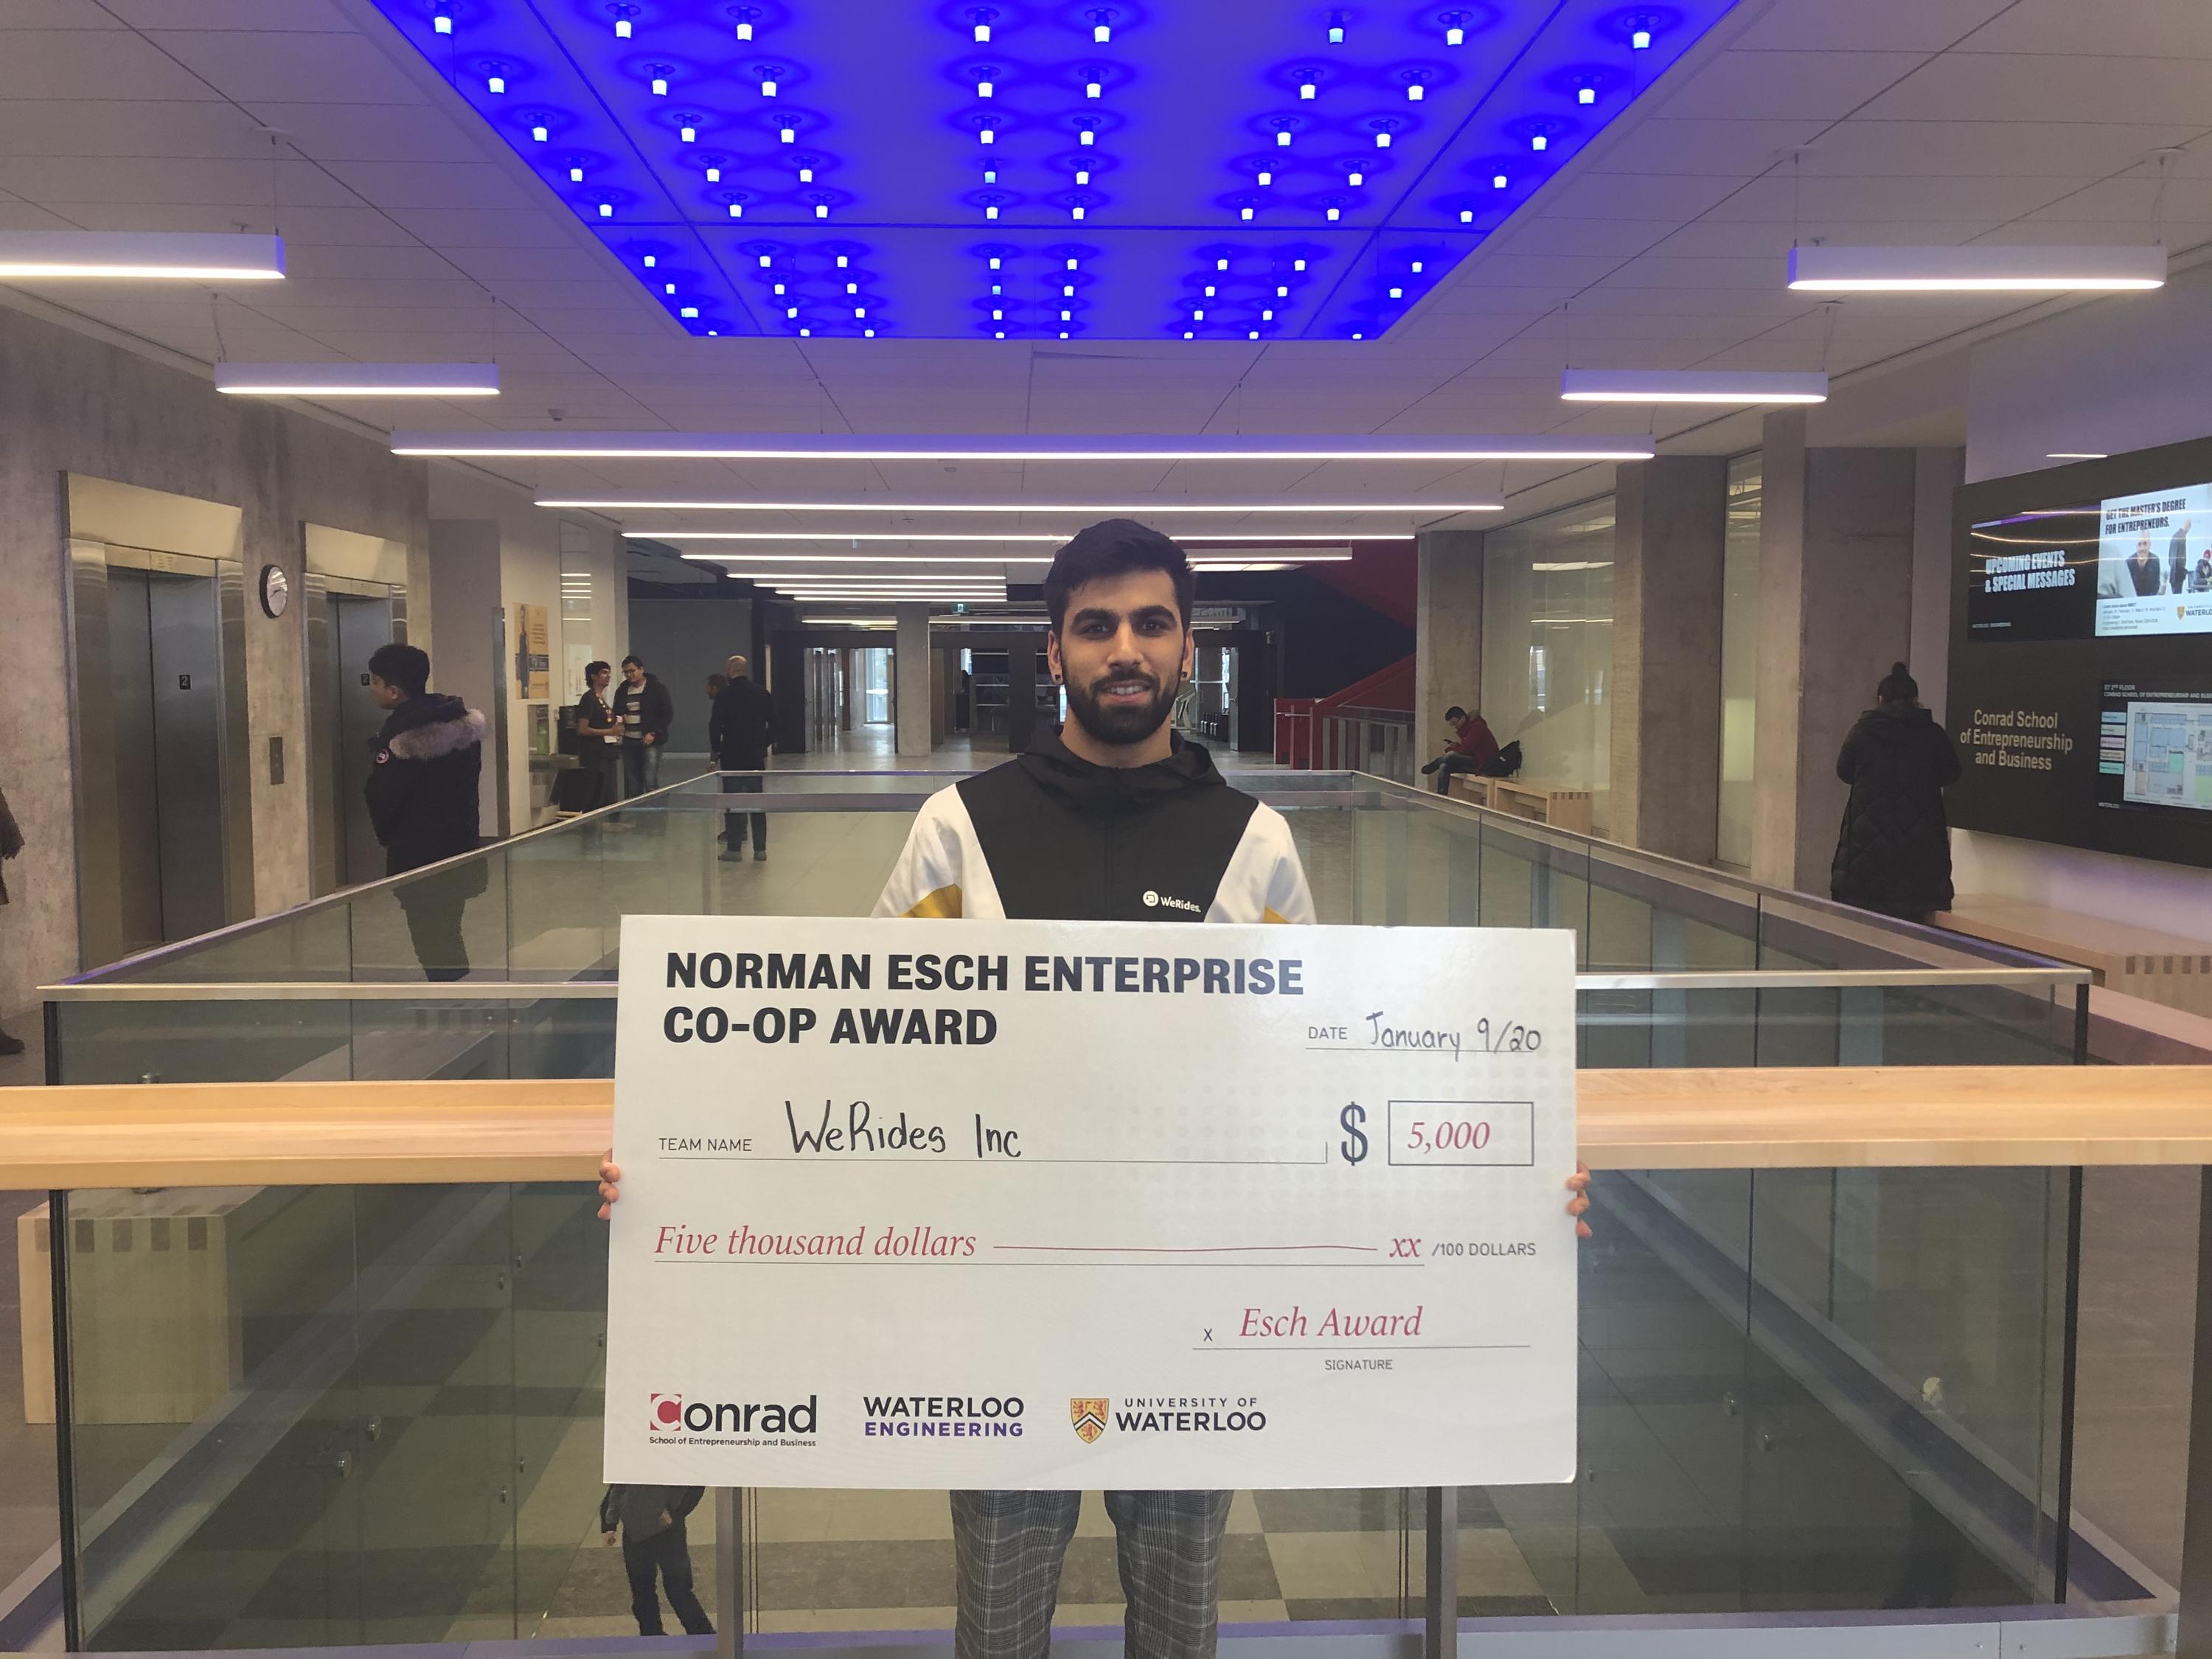 Adil Dharshi, foudner of WeRides Inc. holds cheque for $5,000